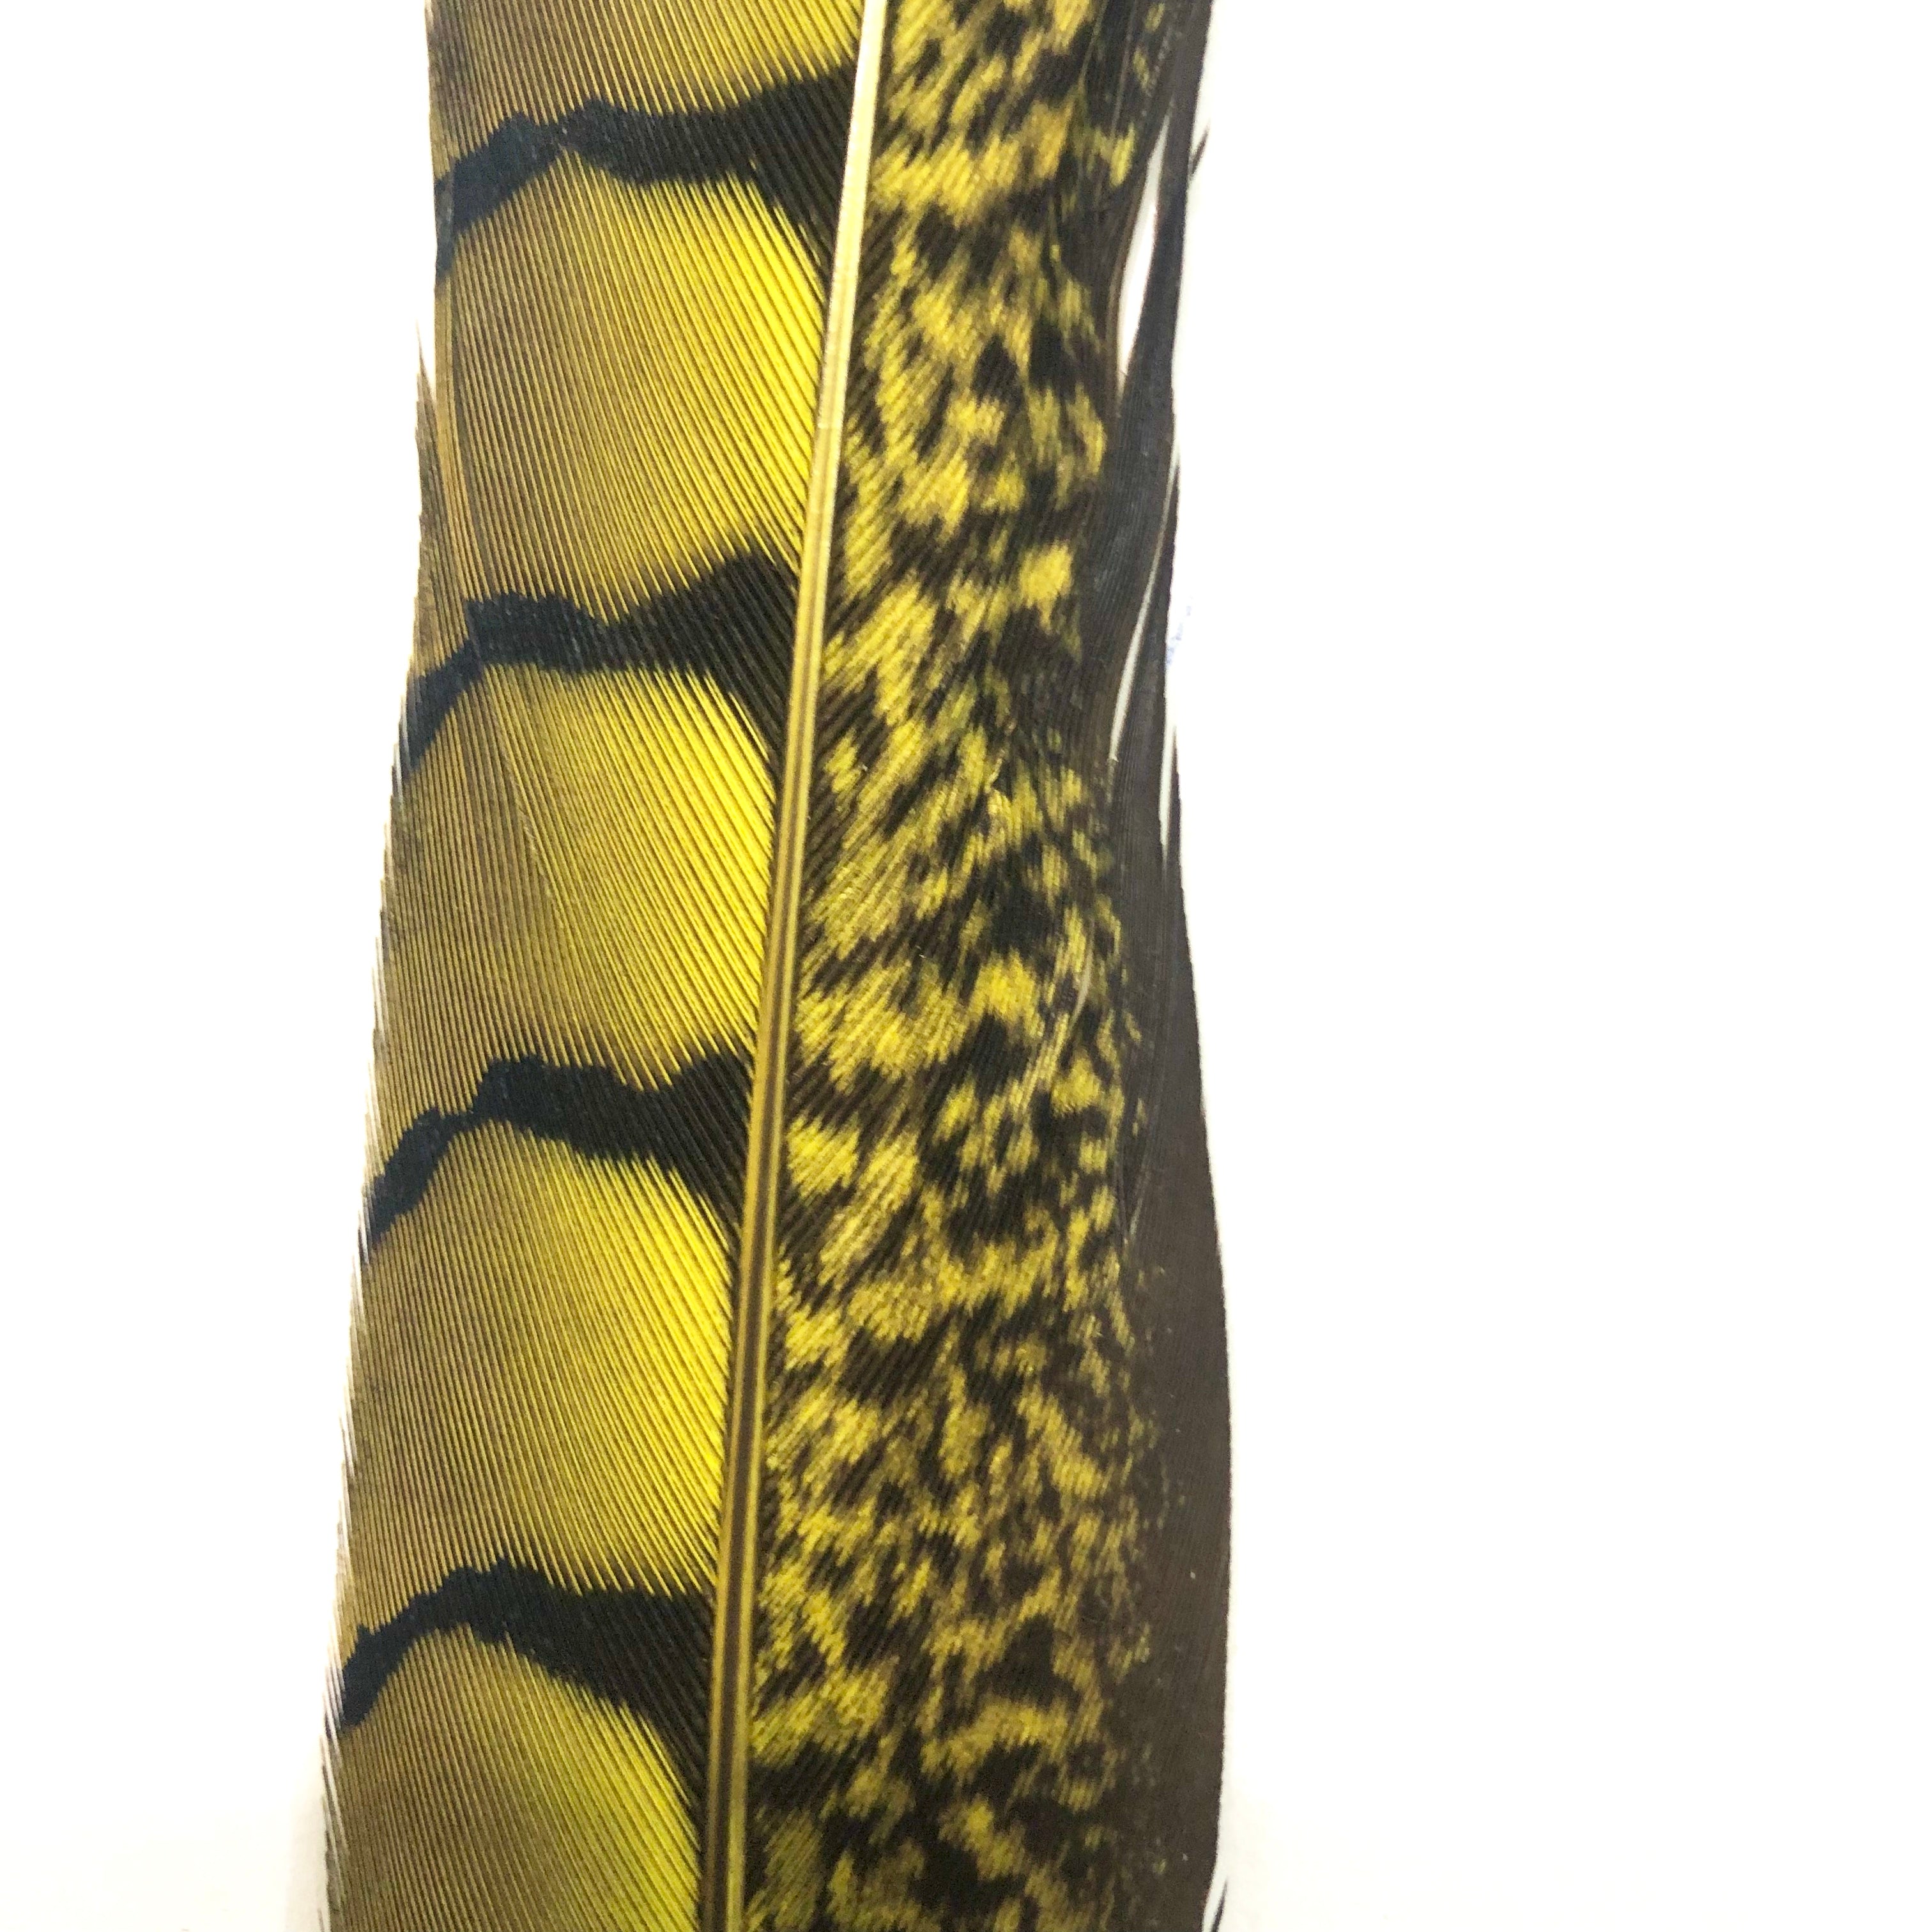 5" to 10" Lady Amherst Pheasant Side Tail Feather x 10 pcs - Yellow